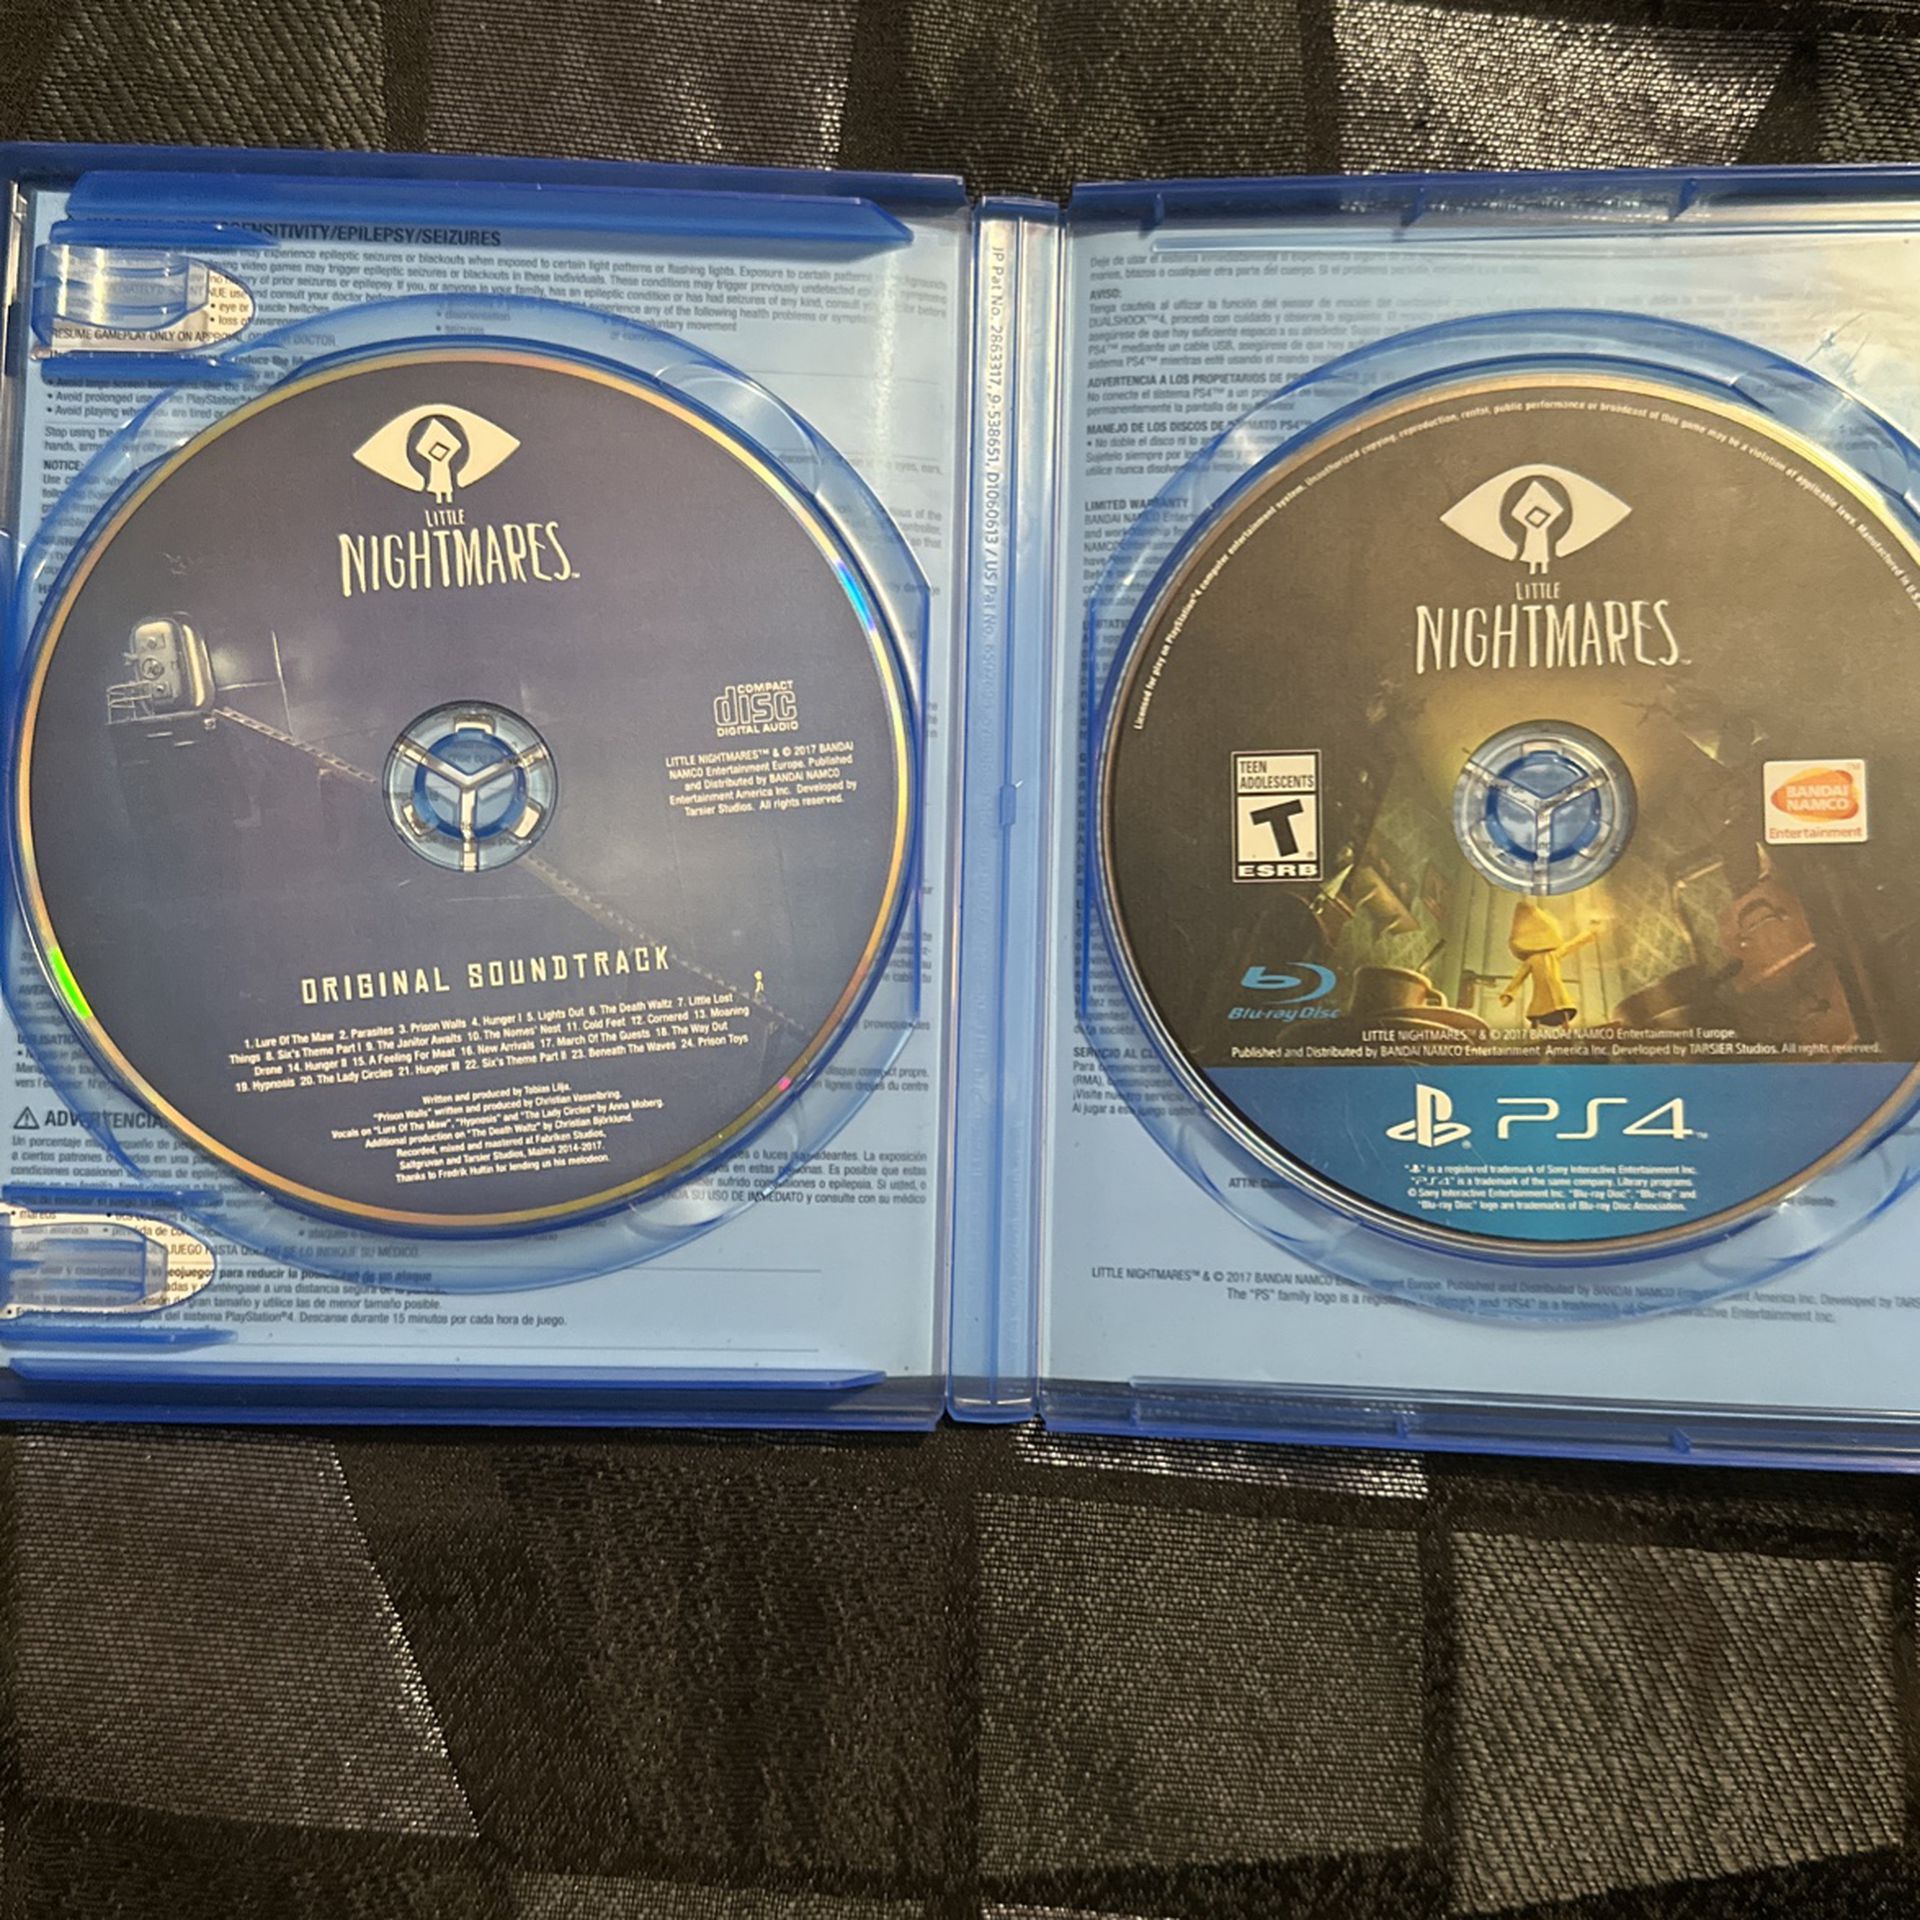 PS4 Little Nightmares 2 for Sale in San Mateo, CA - OfferUp